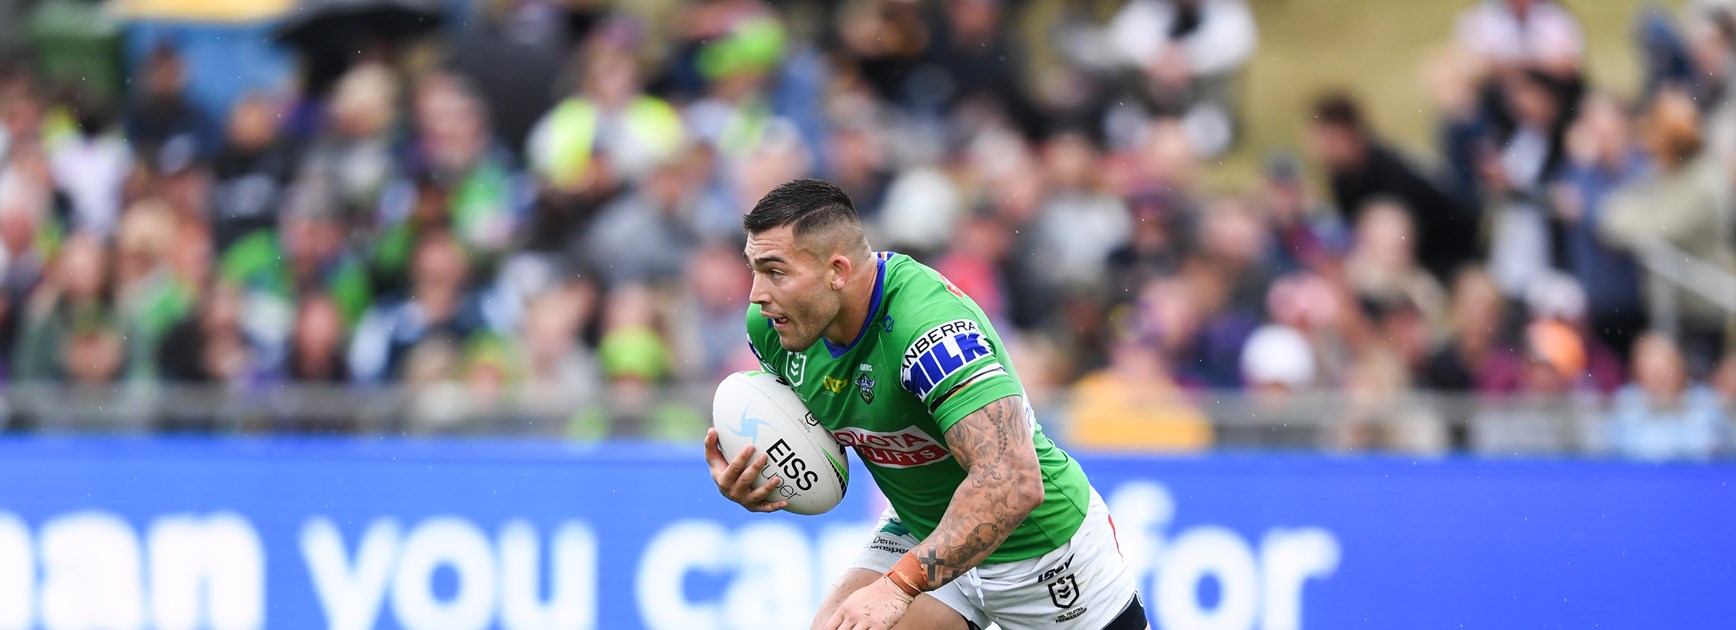 Cotric to celebrate 100 games for the Raiders